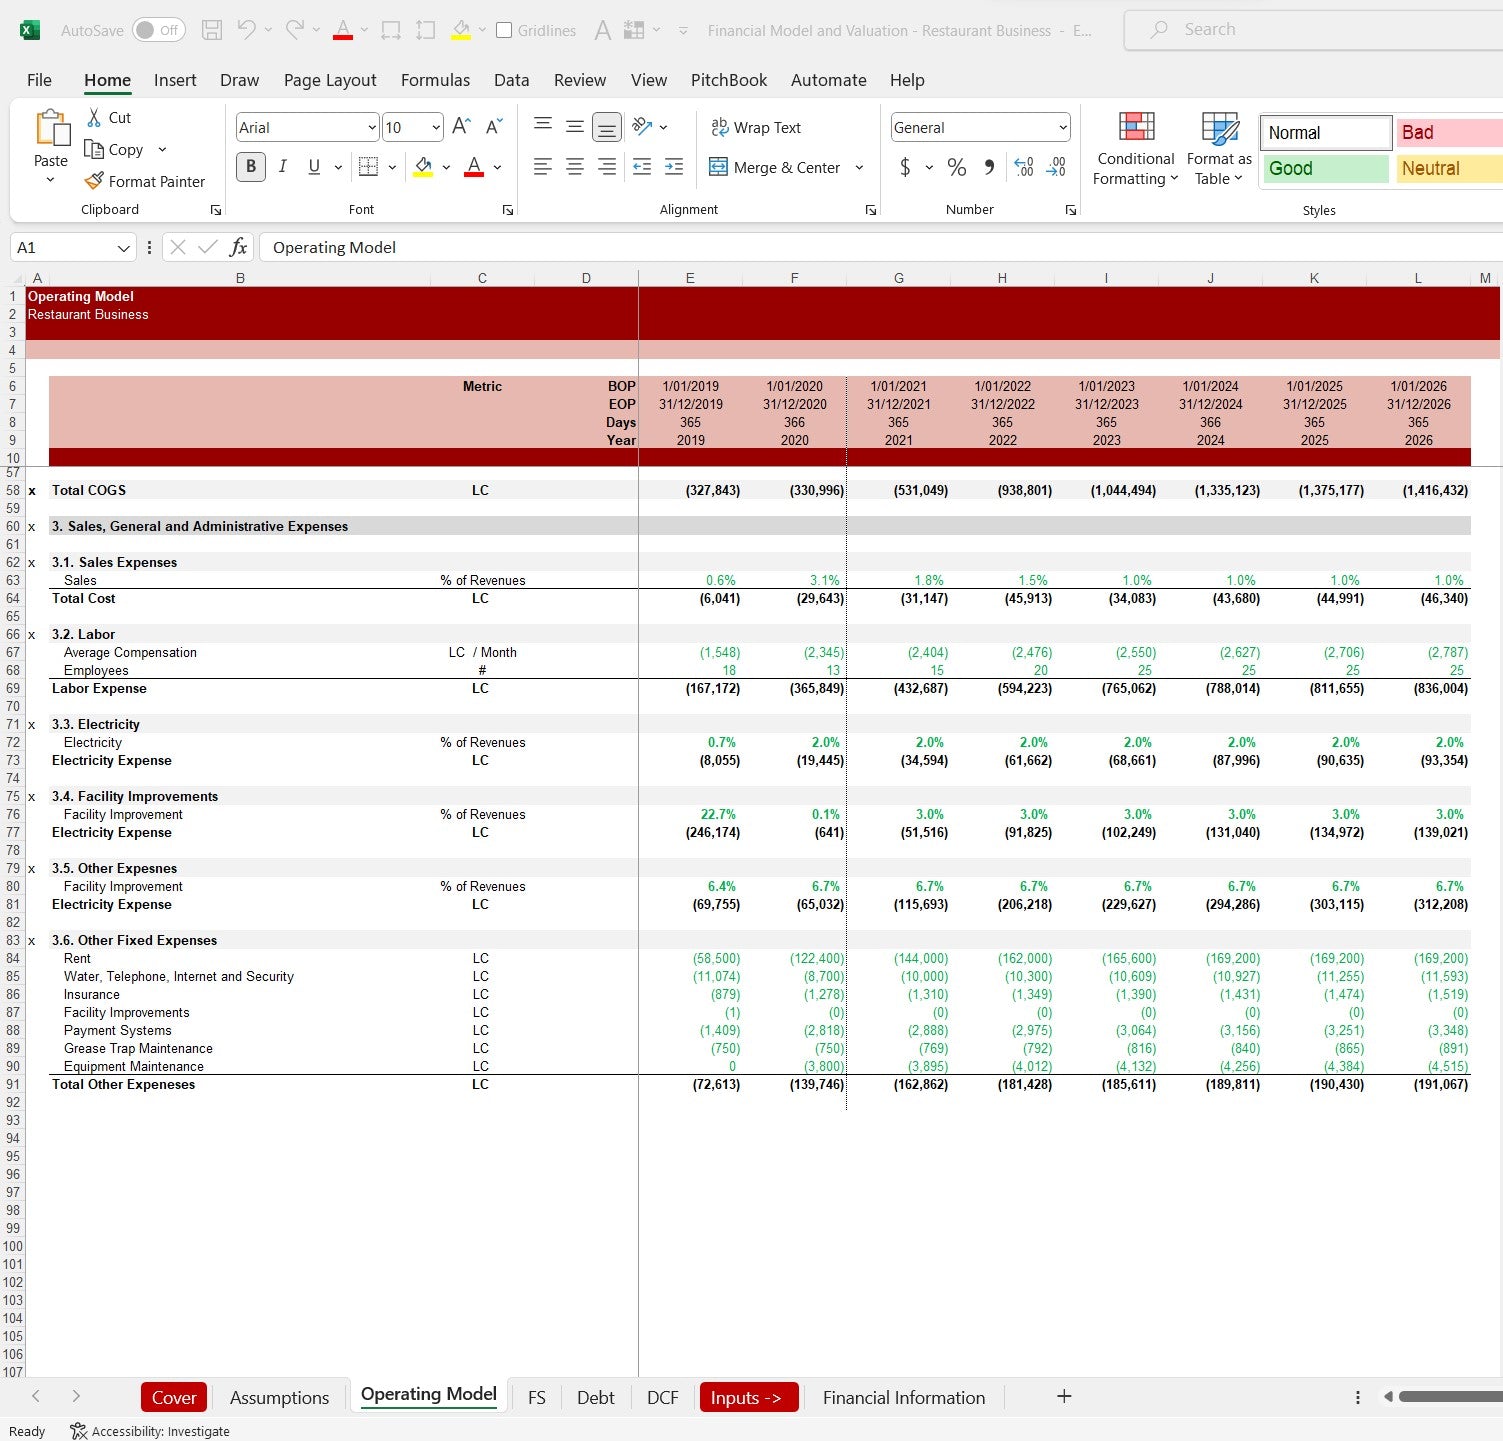 Restaurant Financial Model and Valuation Excel Spreadsheet Template. Operating Model snip 2